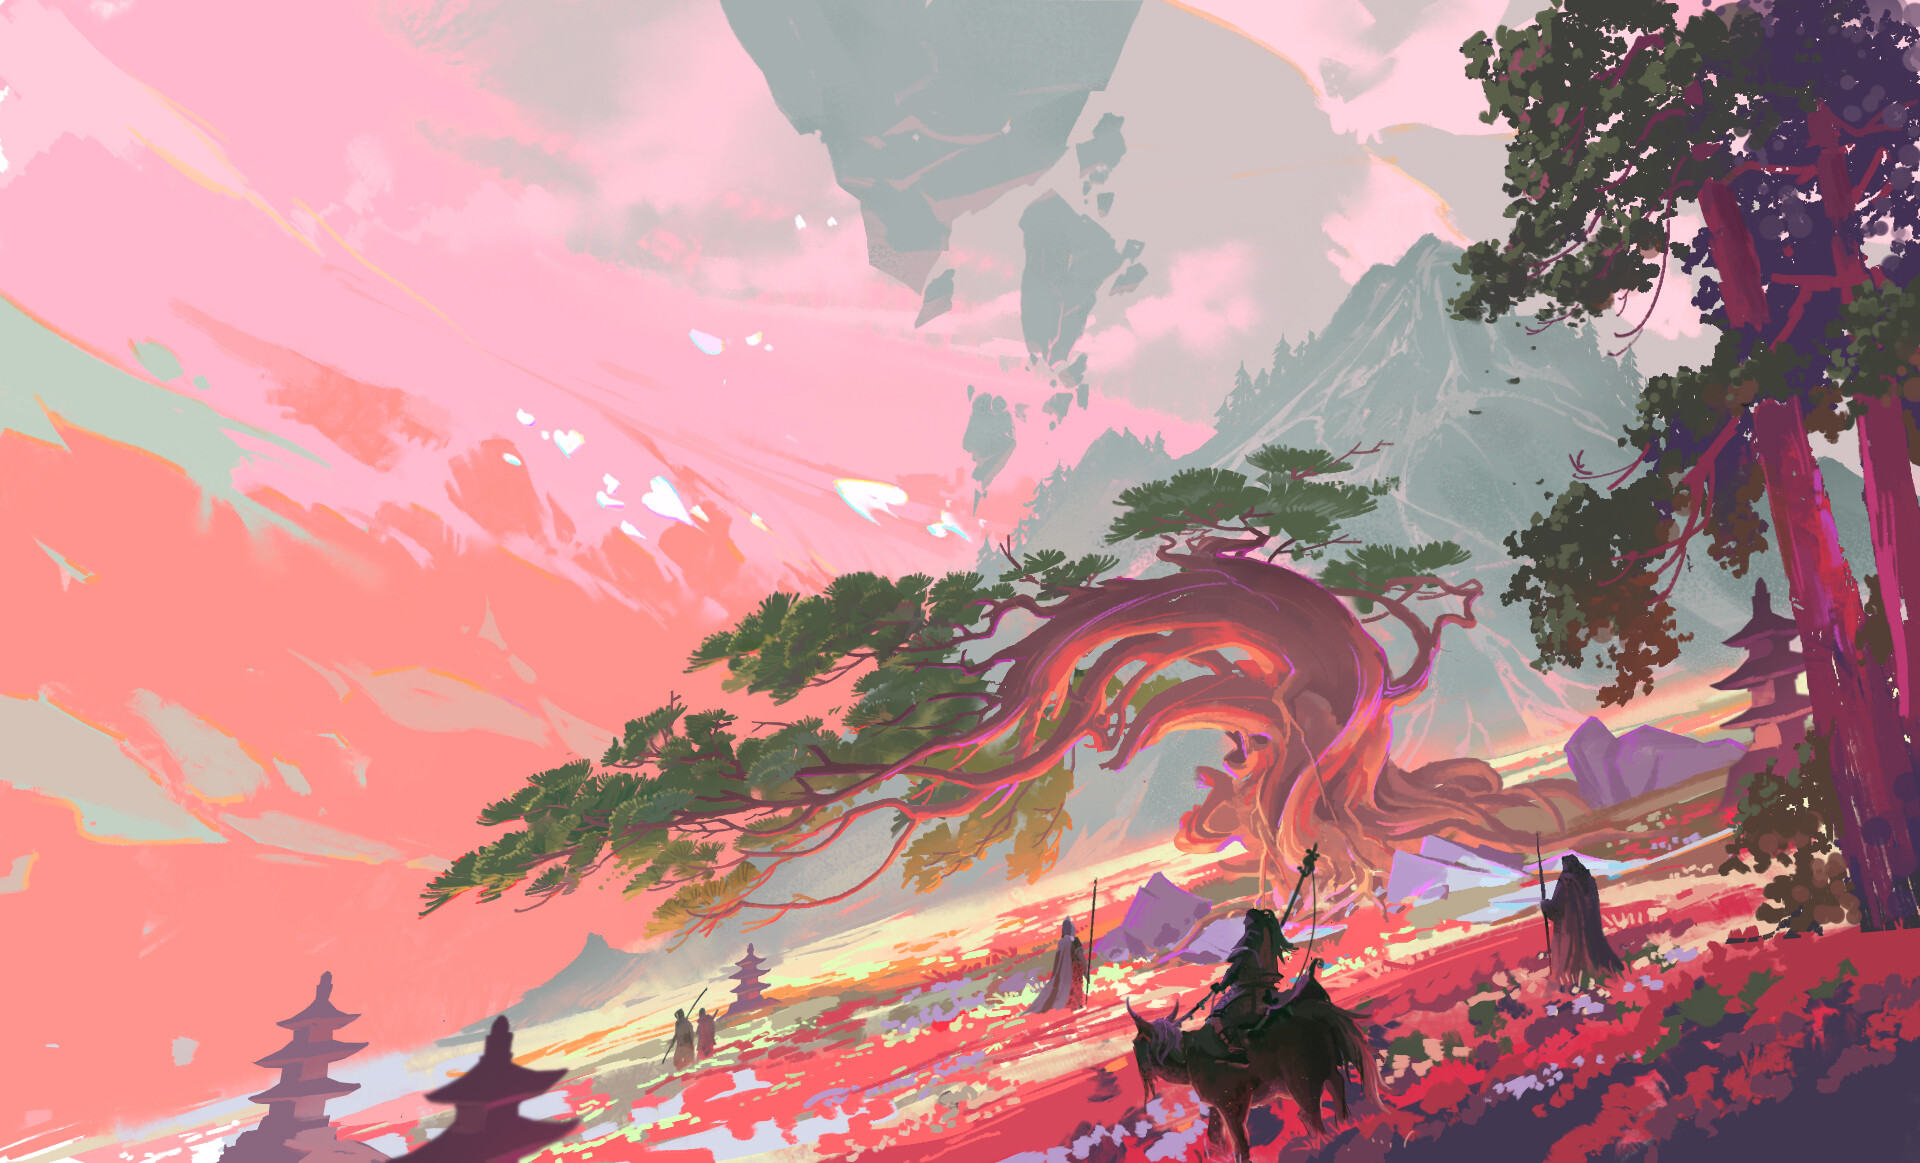 General 1920x1163 MH C digital art landscape trees Asian architecture pink mountains